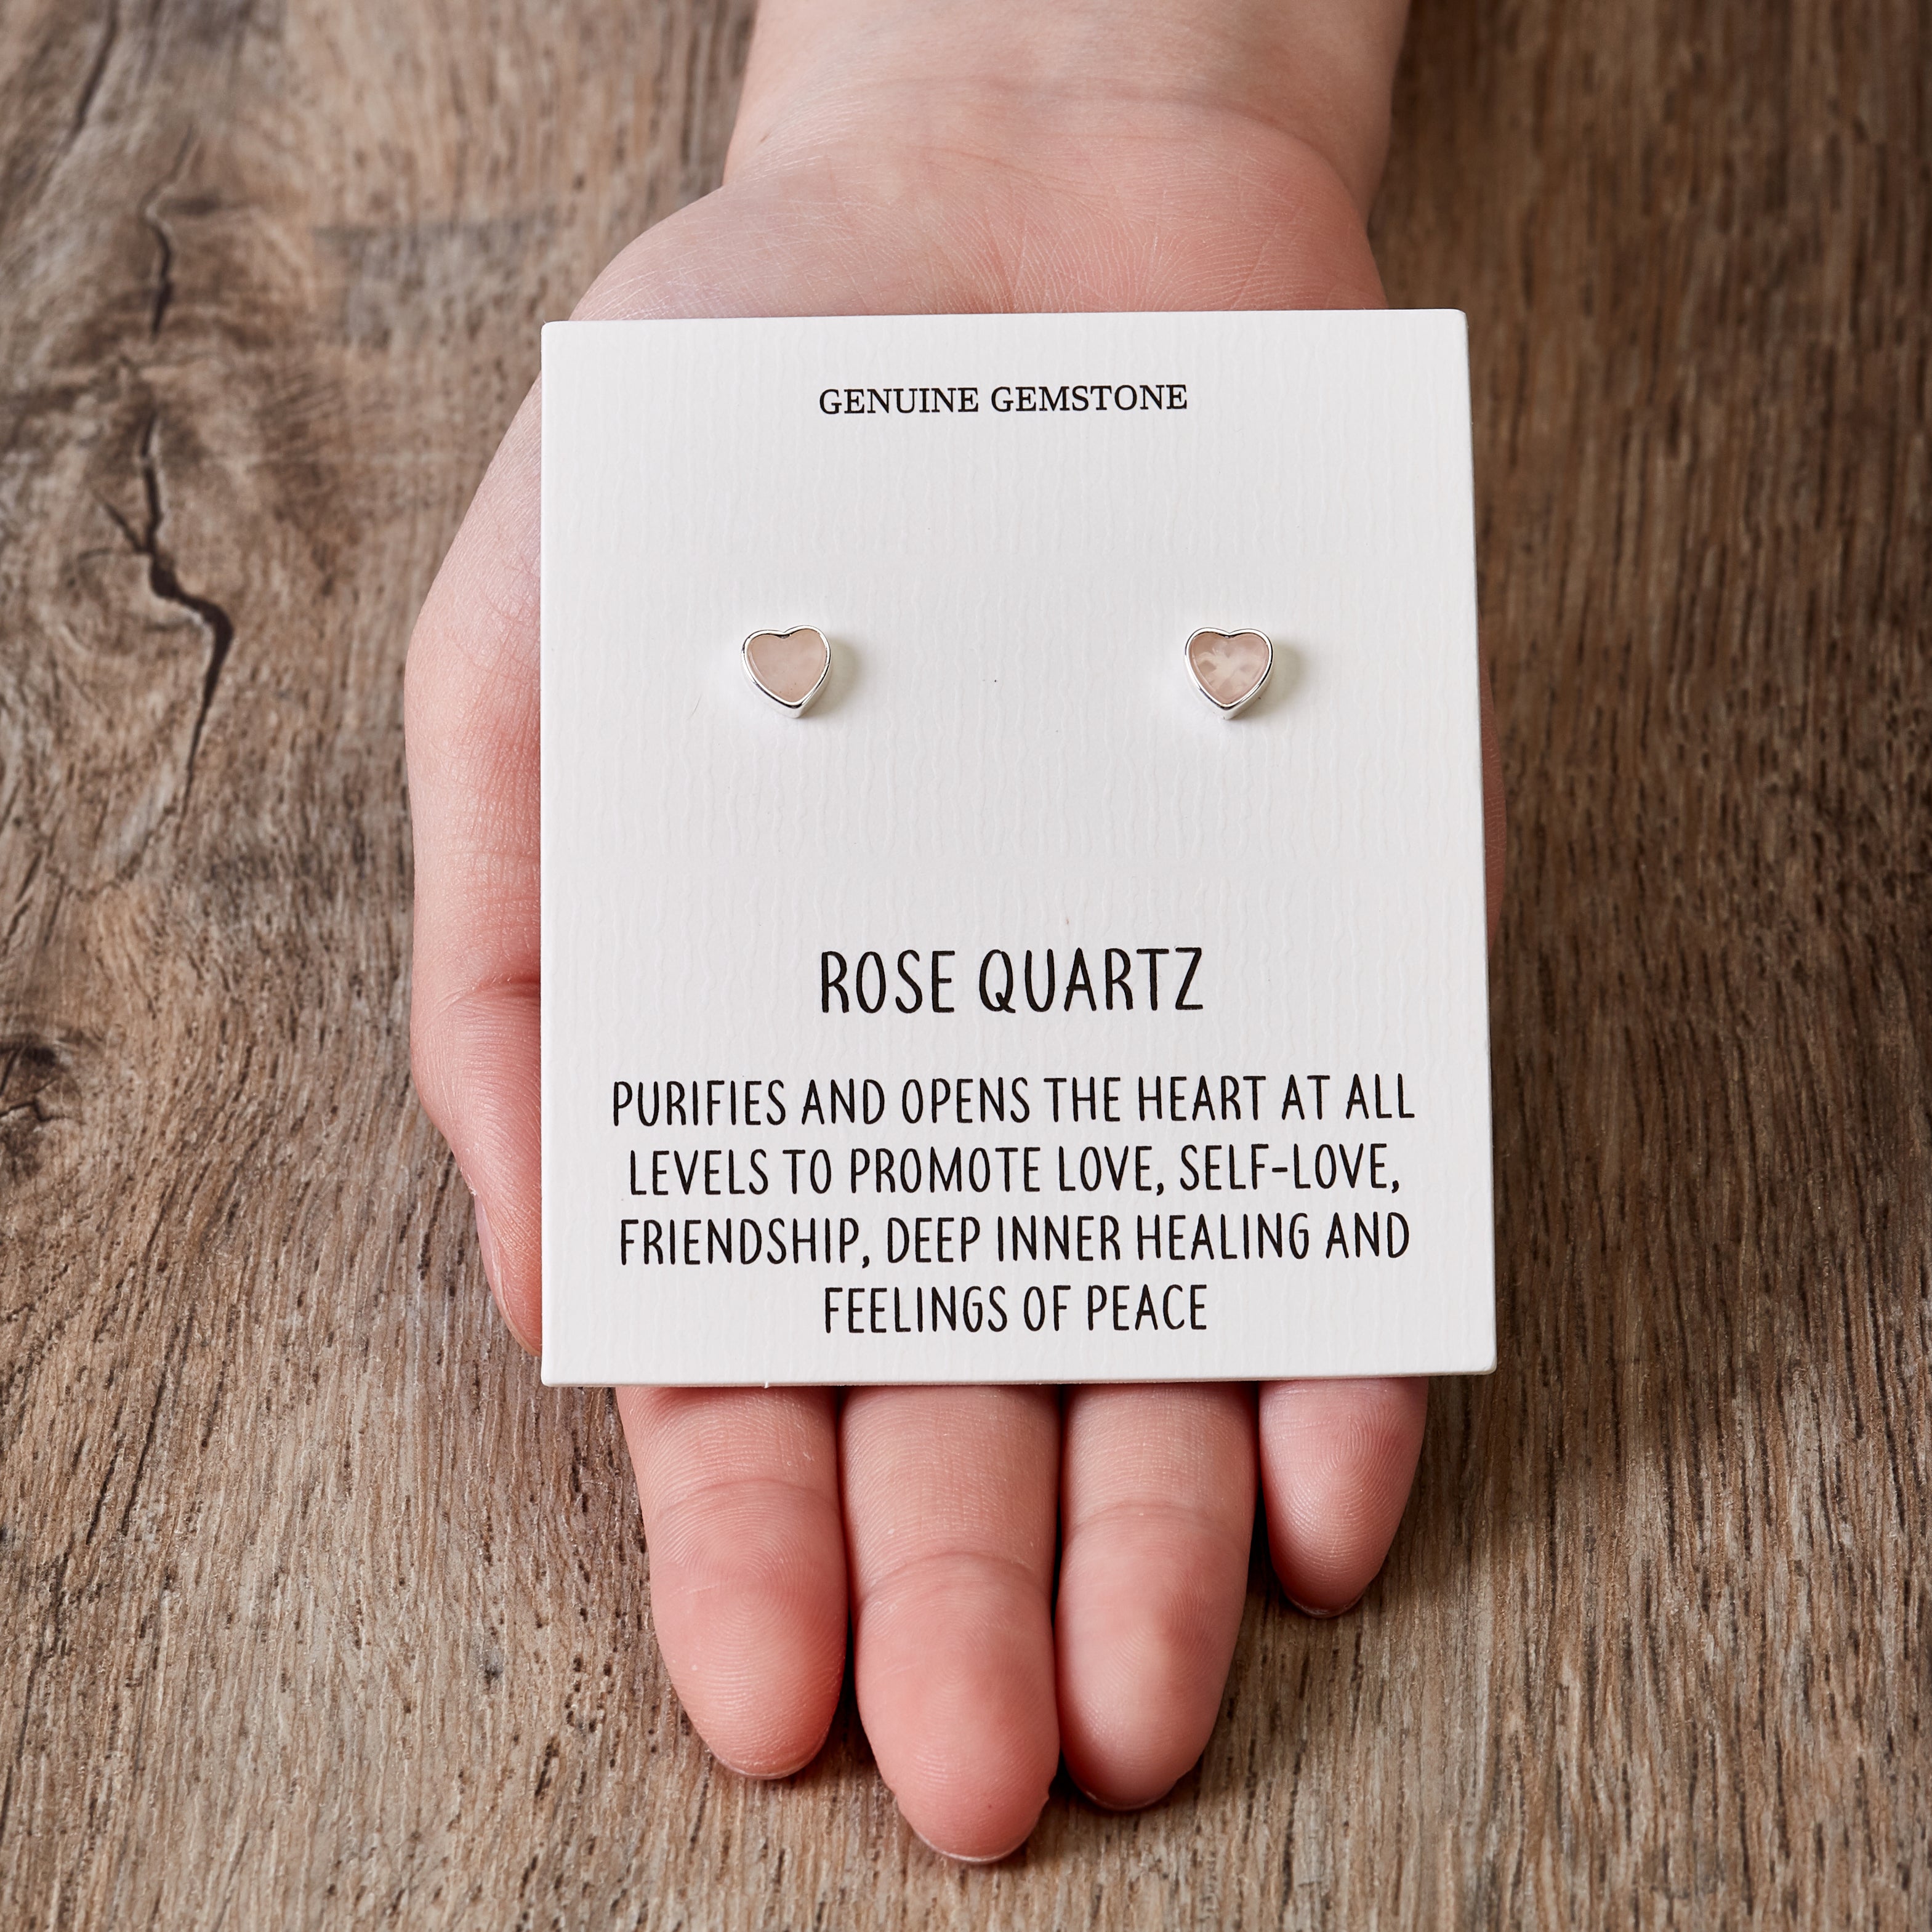 Rose Quartz Heart Stud Earrings with Quote Card